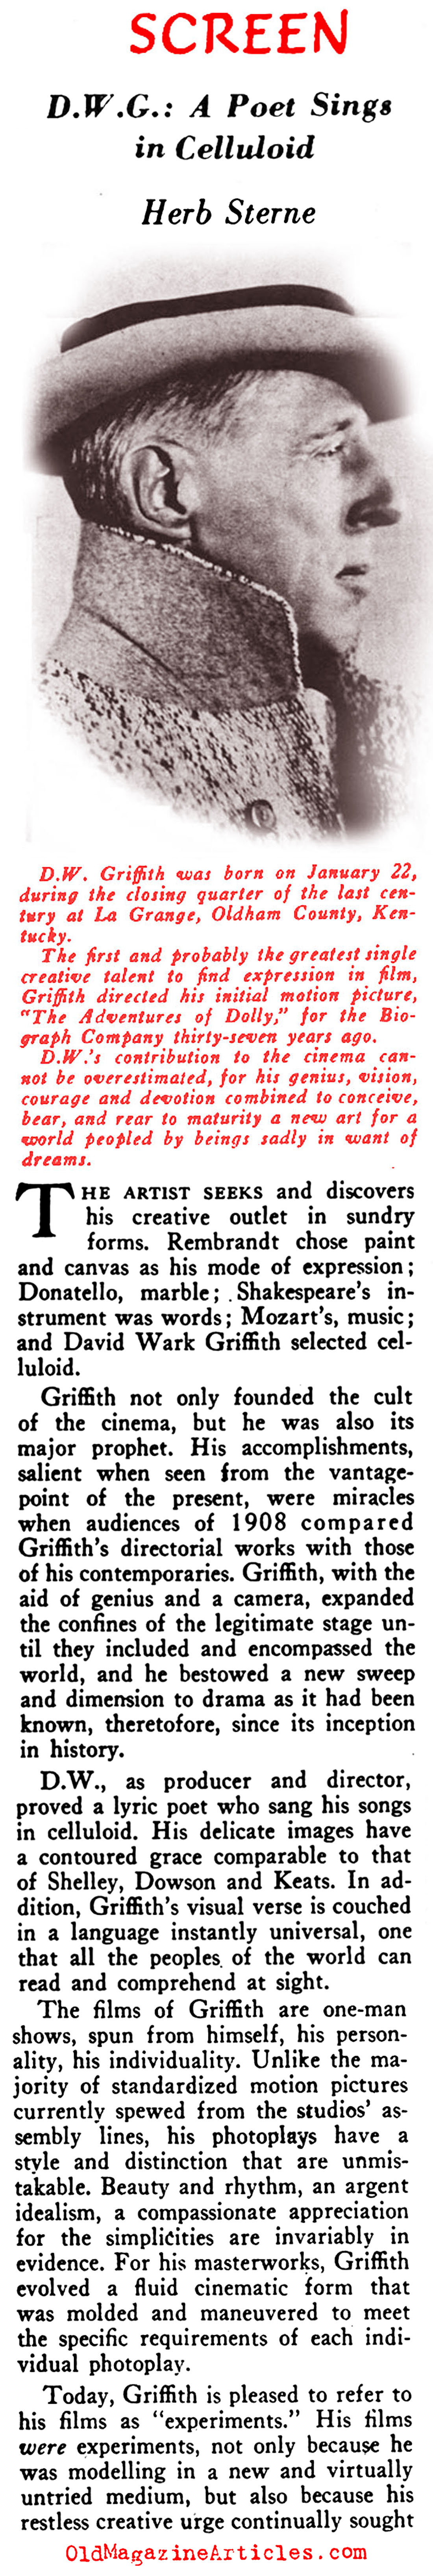 A Salute to D.W. Griffith (Rob Wagner's Script Magazine, 1945)